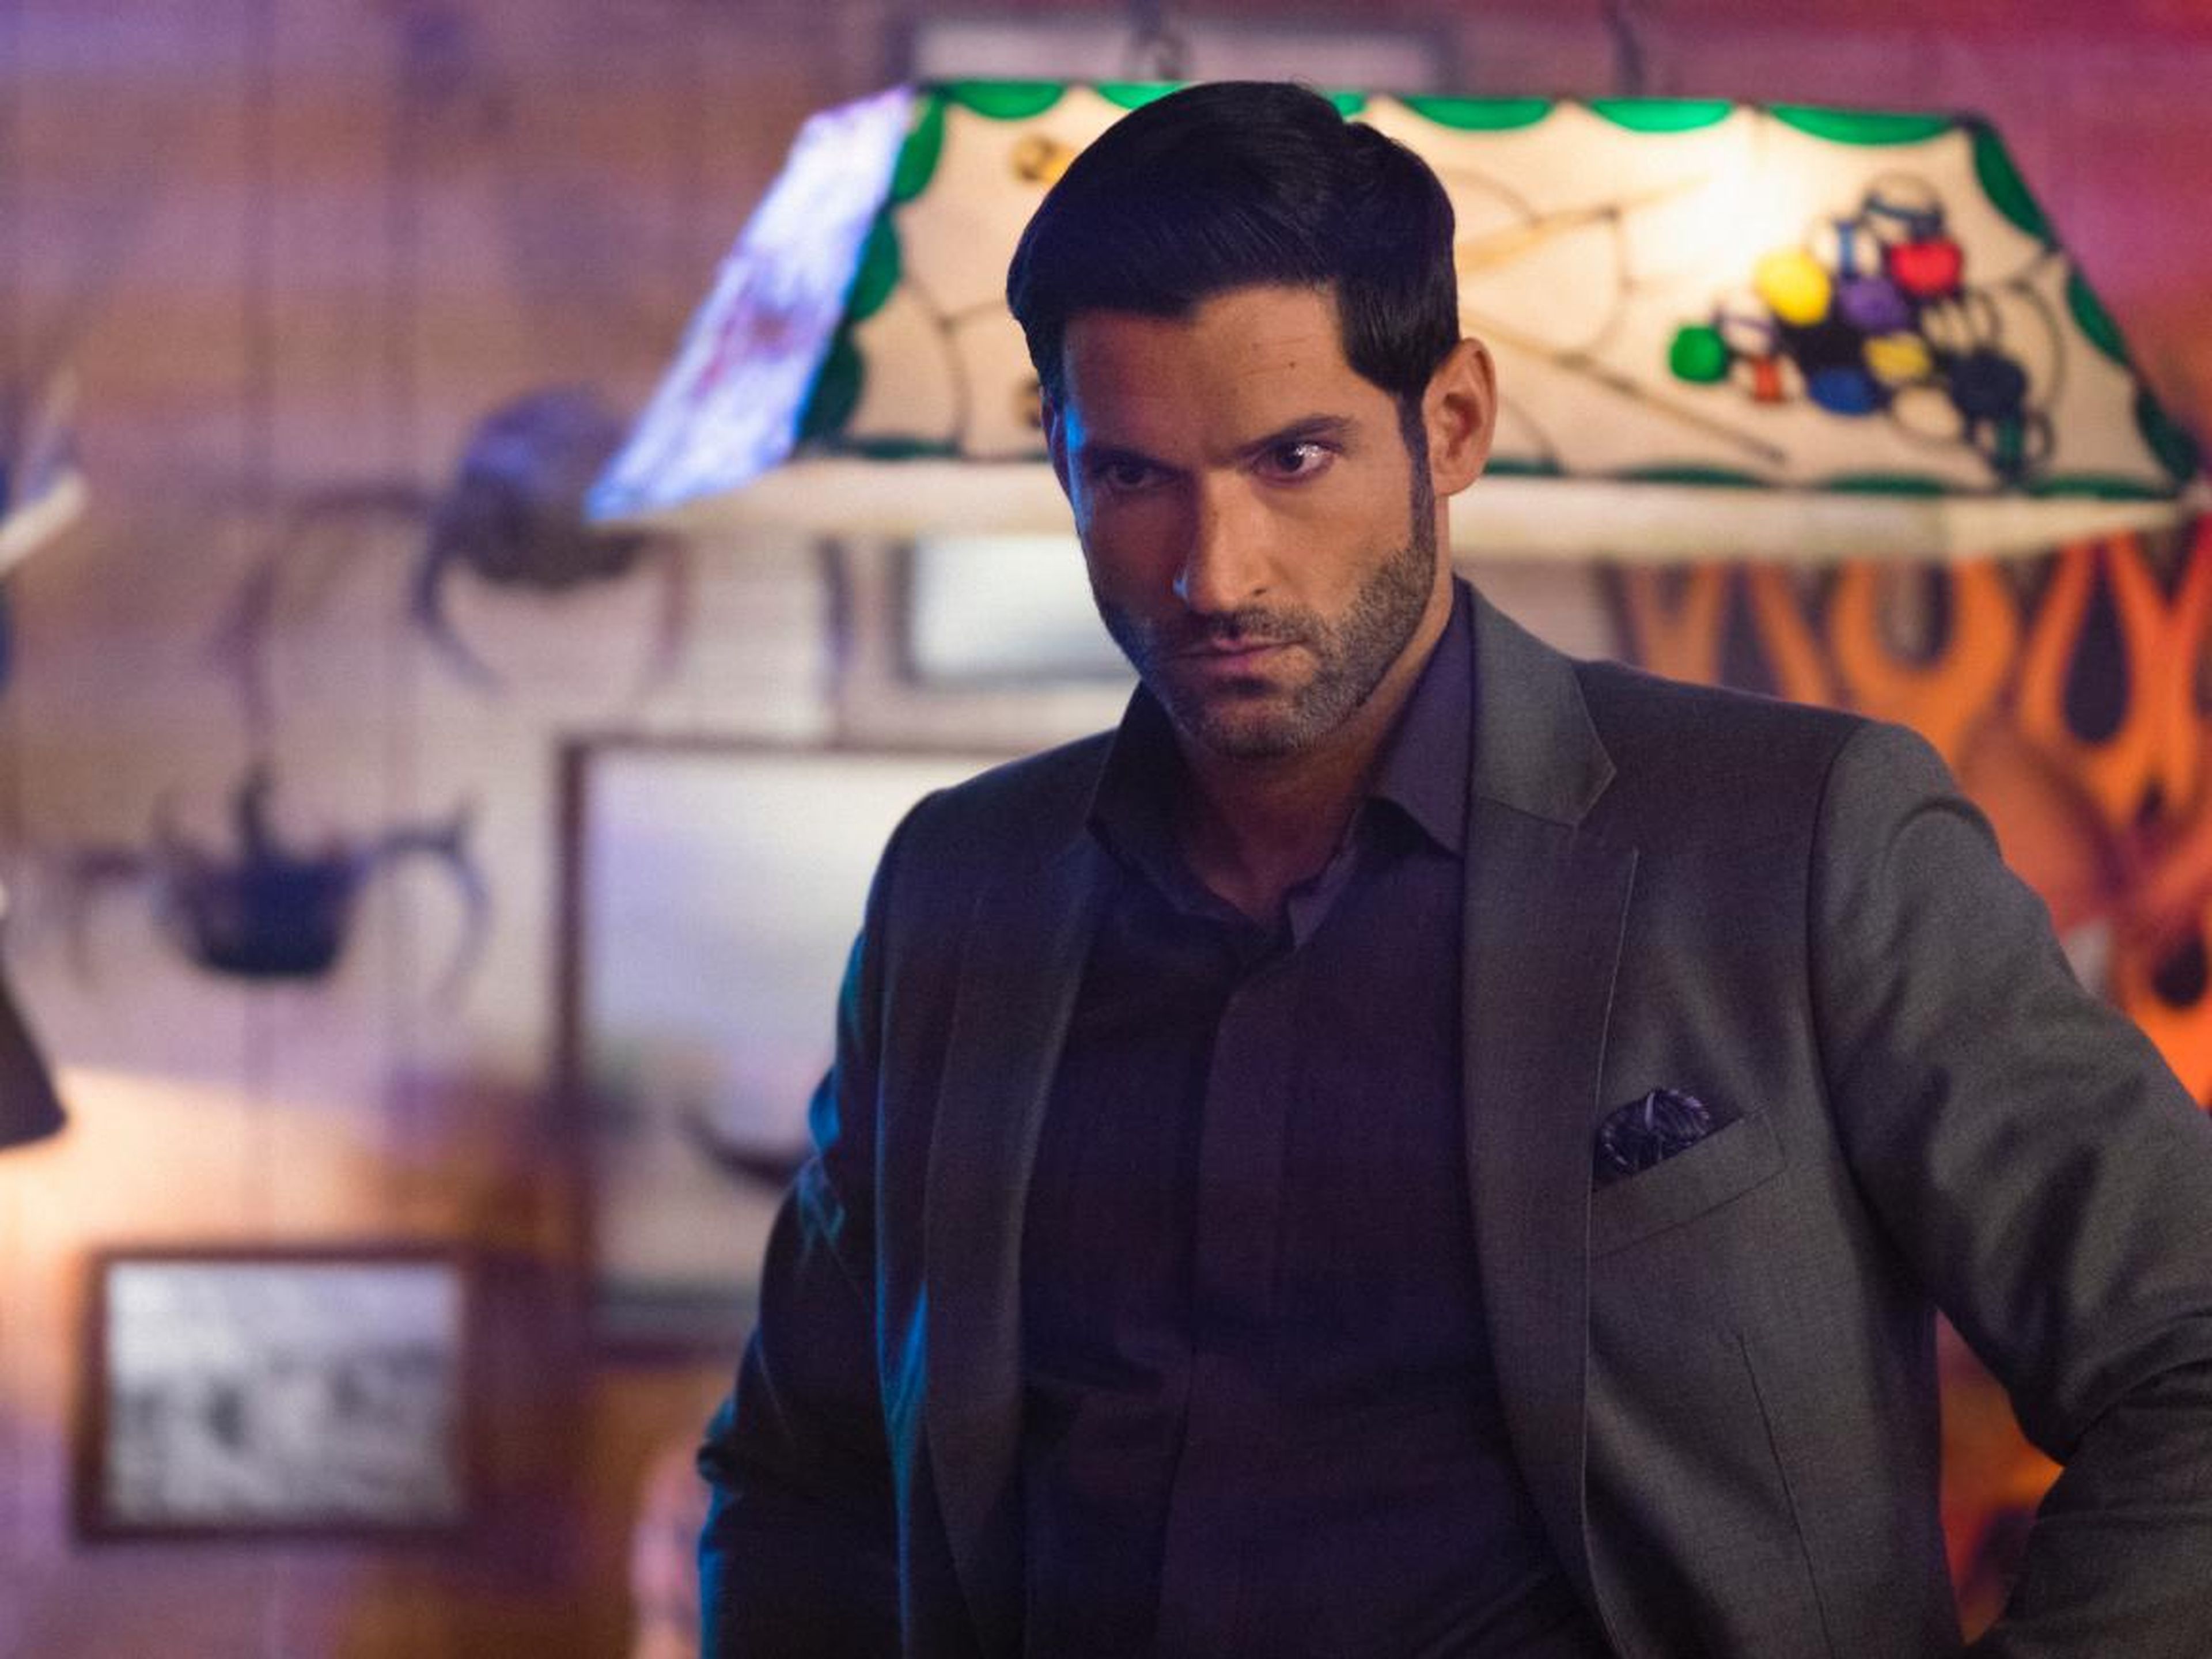 The fifth season of "Lucifer" will drop in 2020 in two parts.